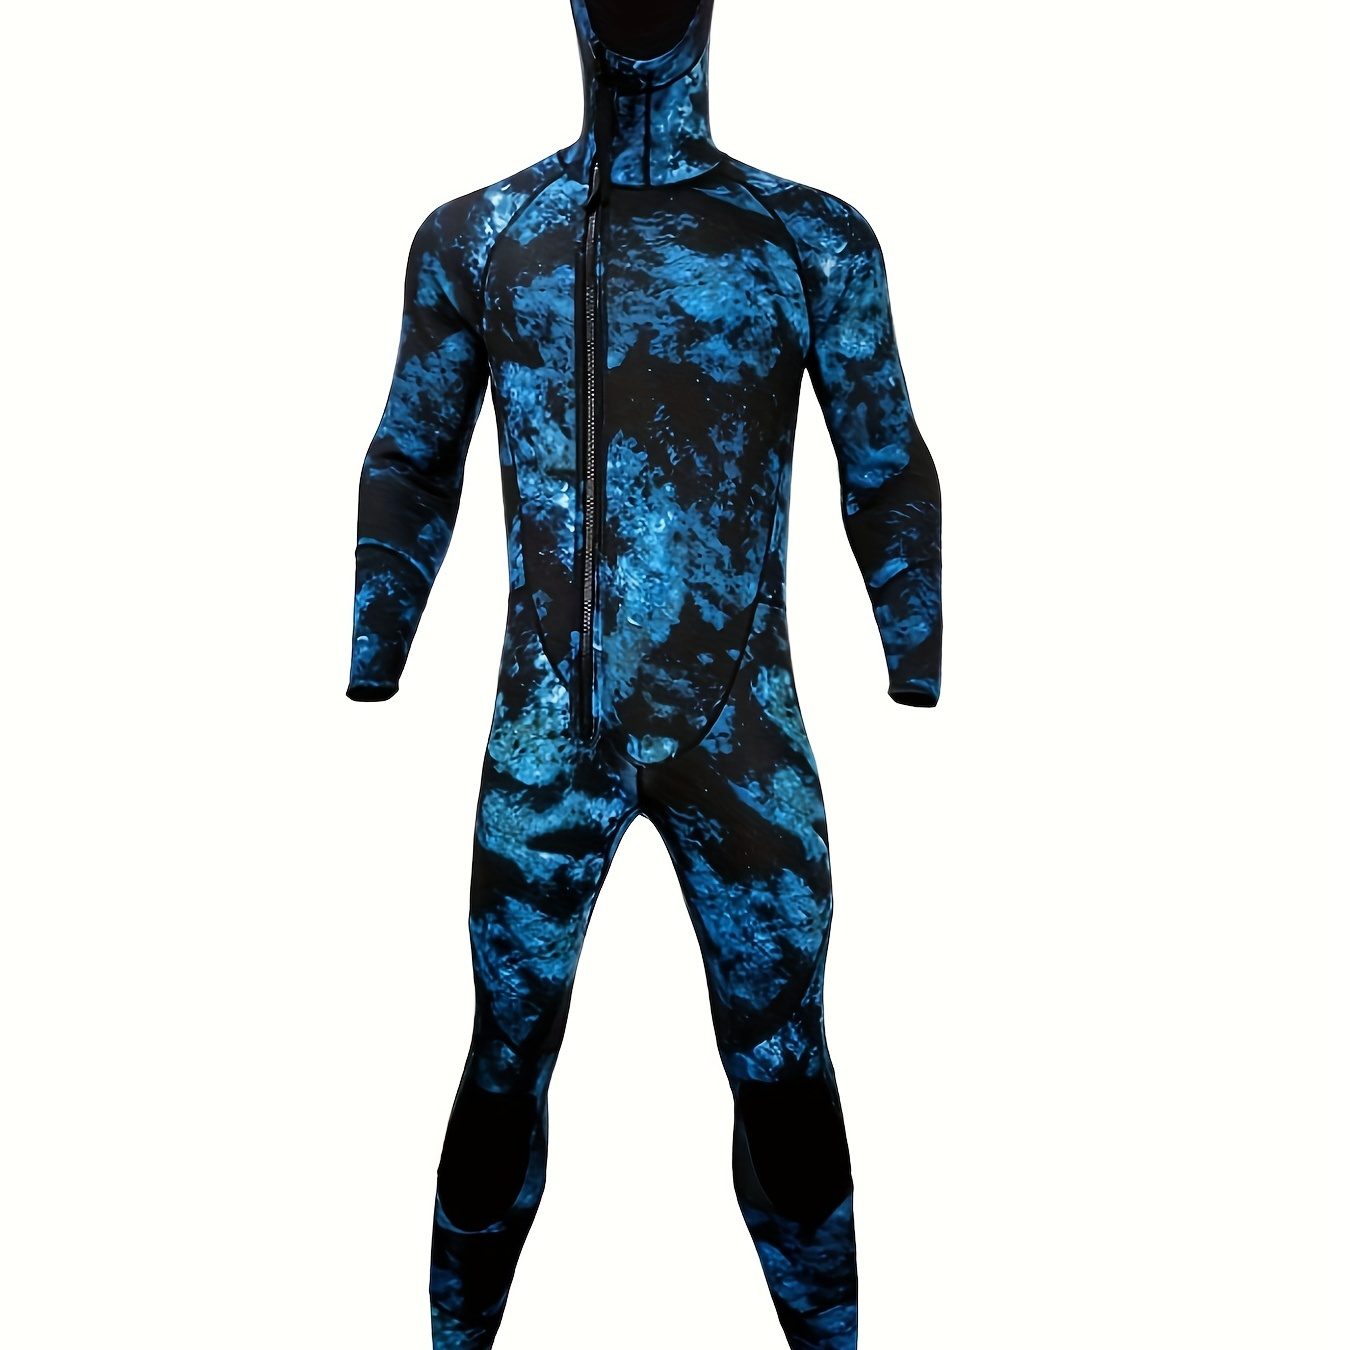  Wetsuit: Sports & Outdoors